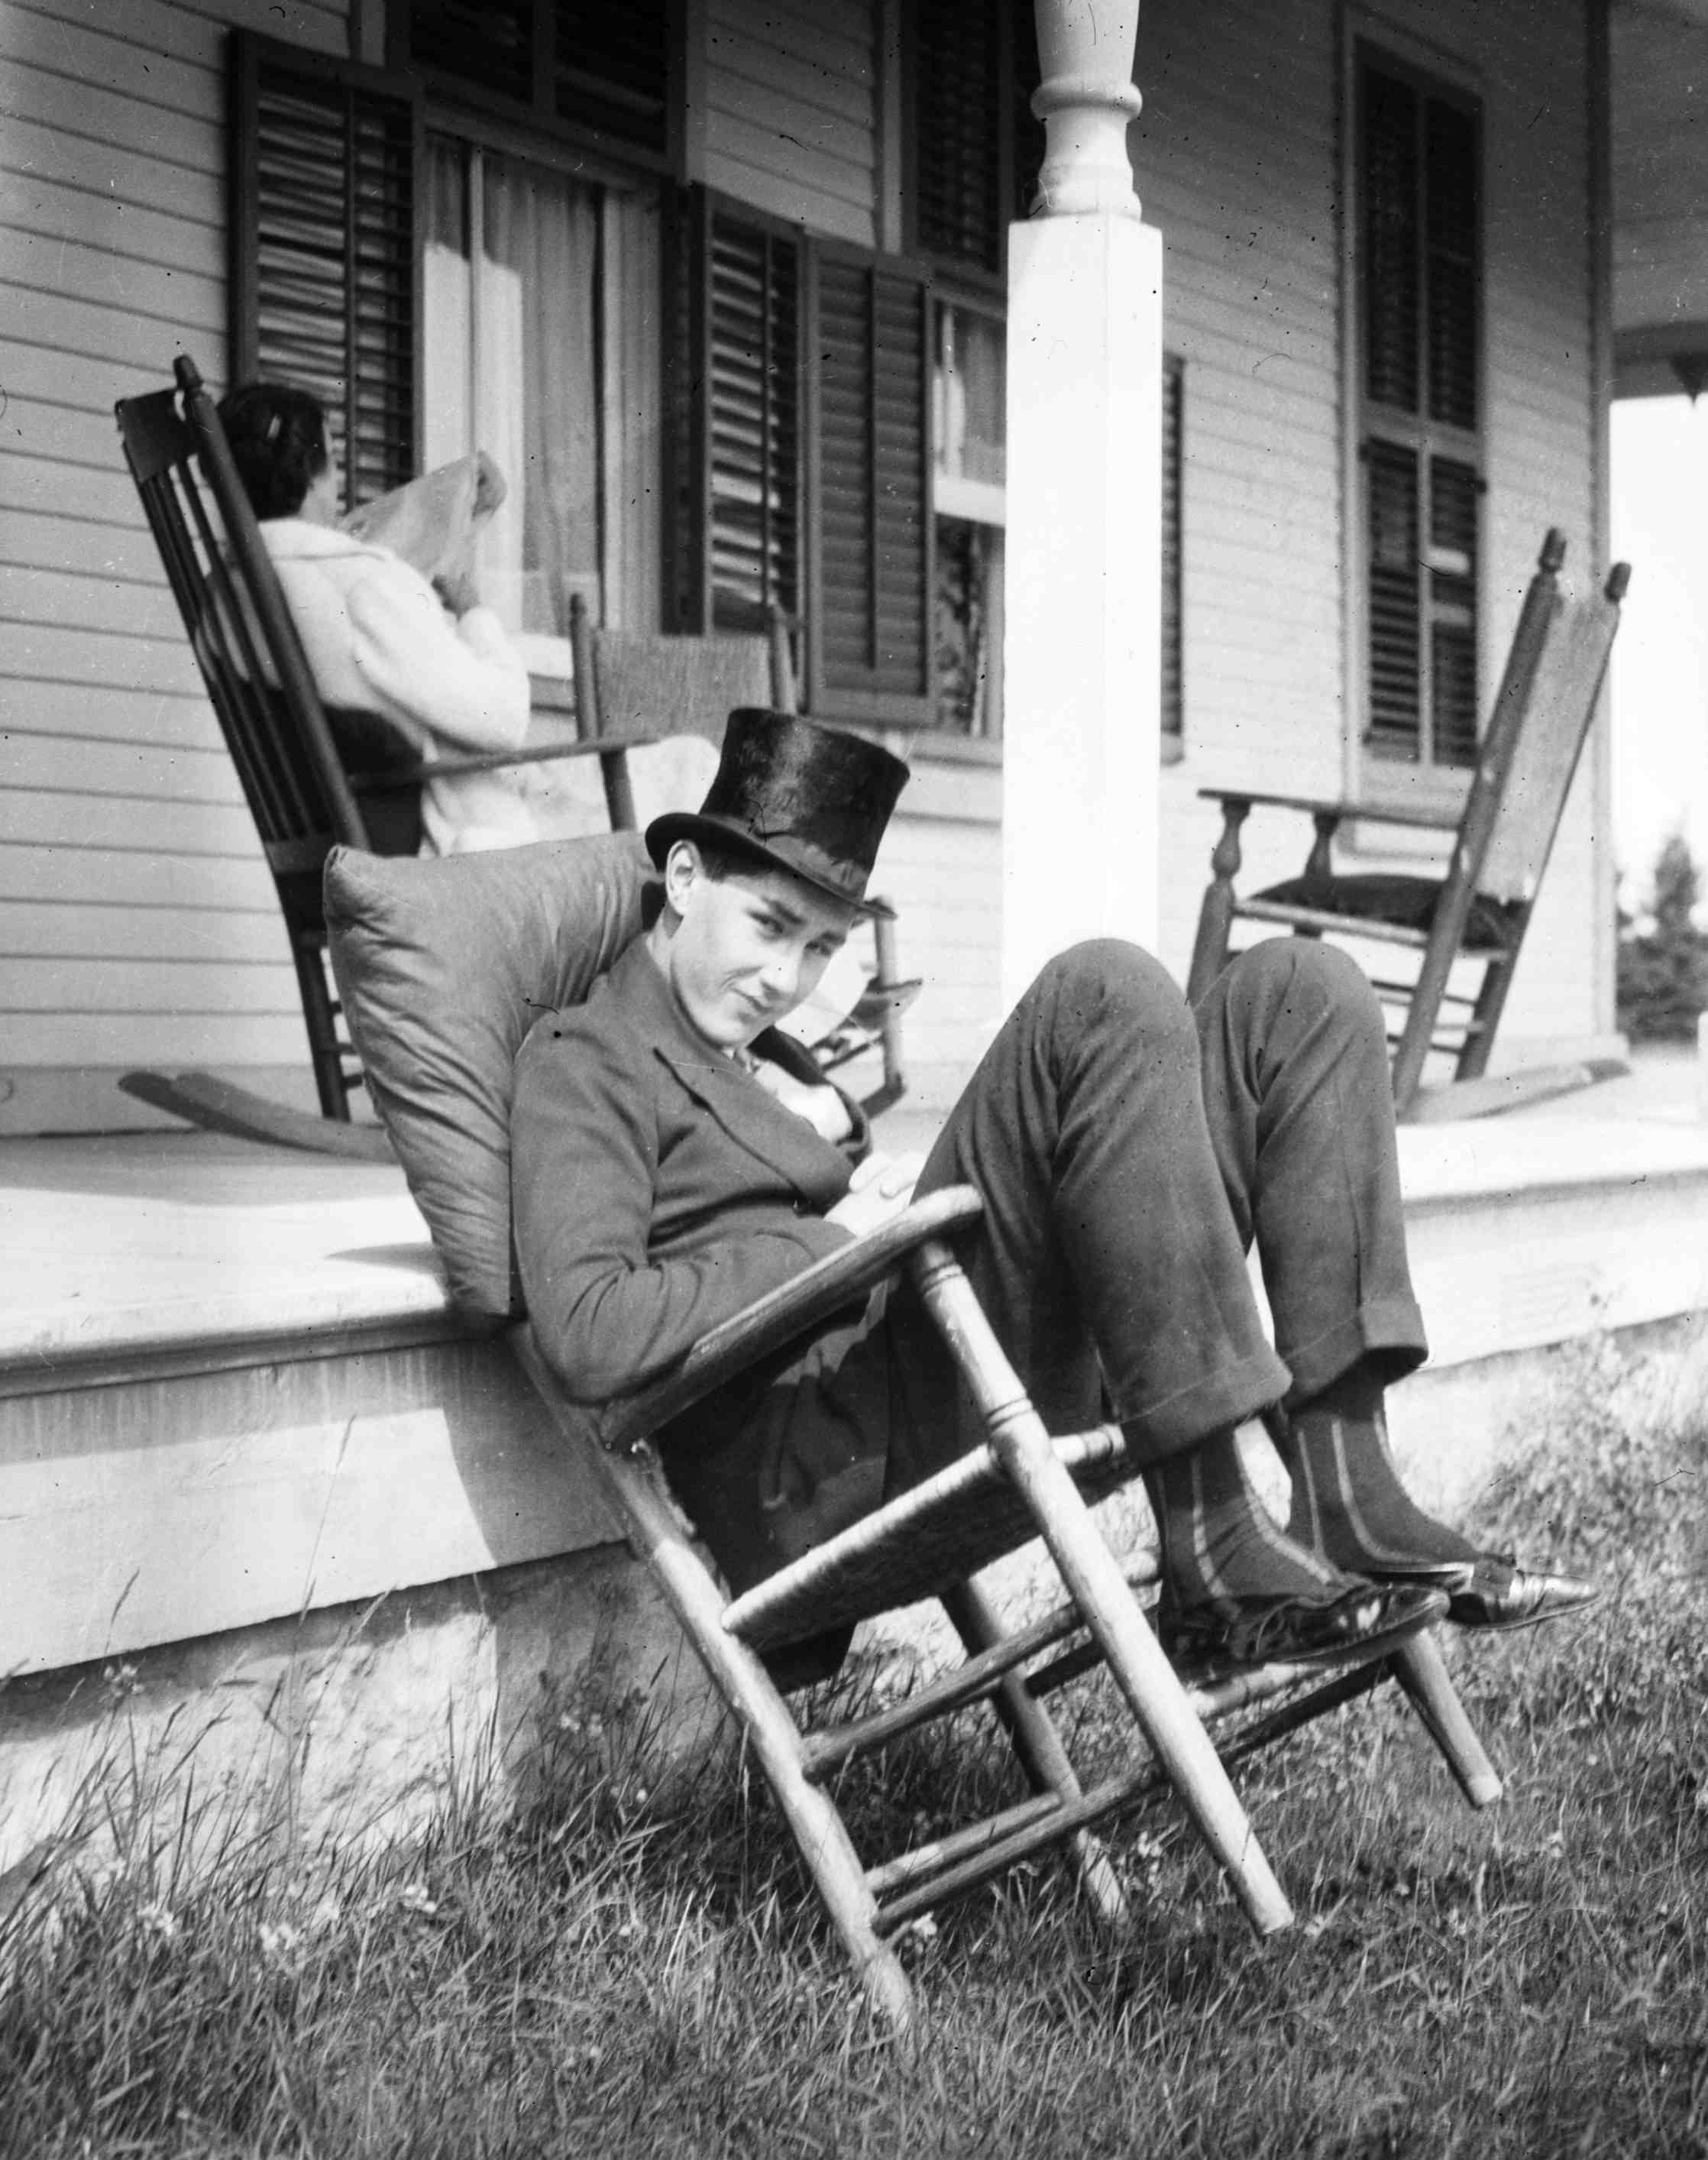 A young man wearing a top hat and sitting nonchalantly on a chair, while a woman reads in the background.